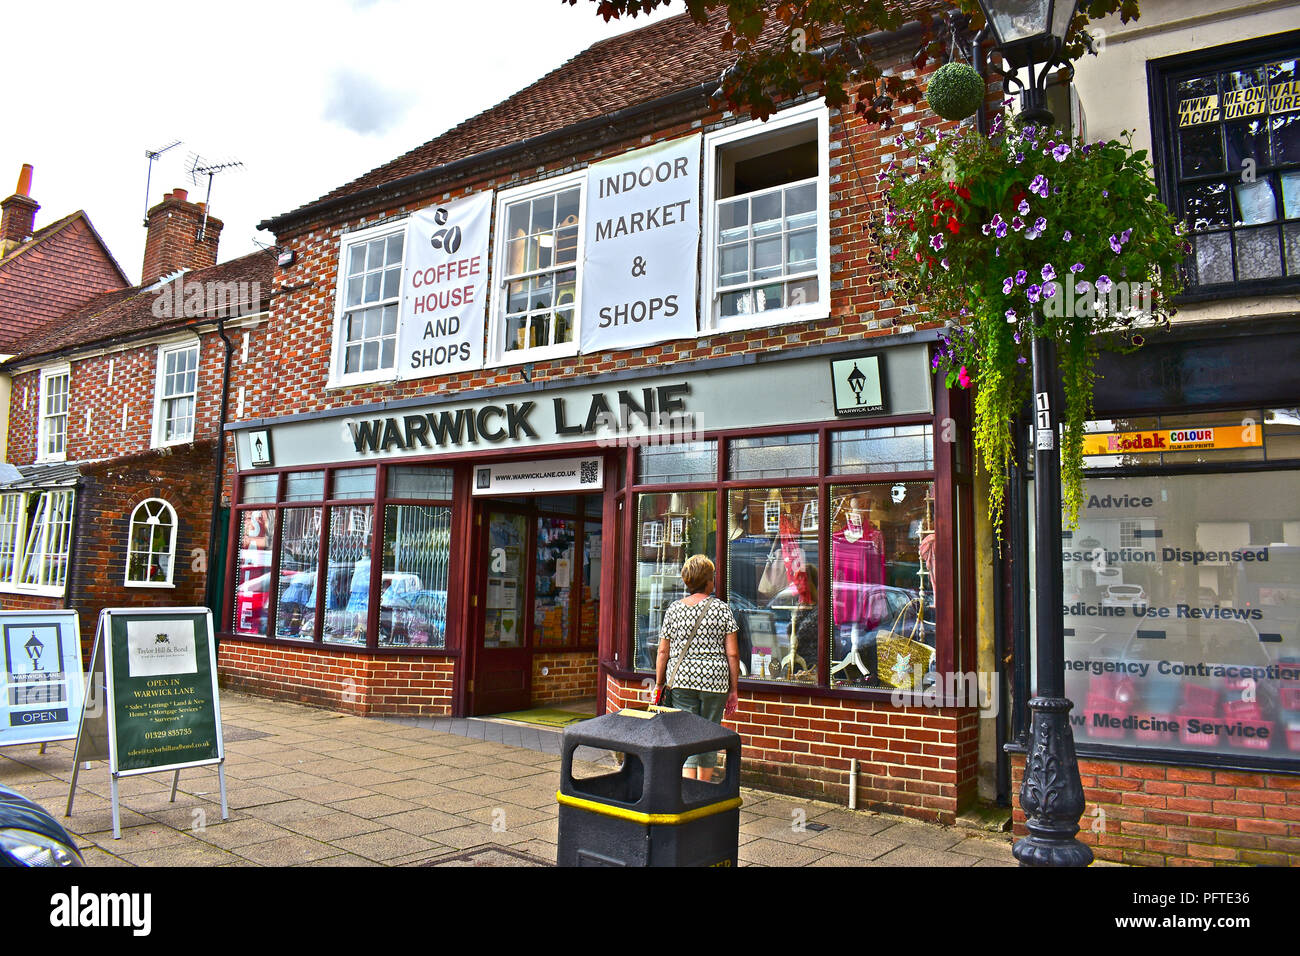 Warwick Lane is a collection of small independendant shops under one roof in the pretty village of Wickham, Hampshire,England Stock Photo